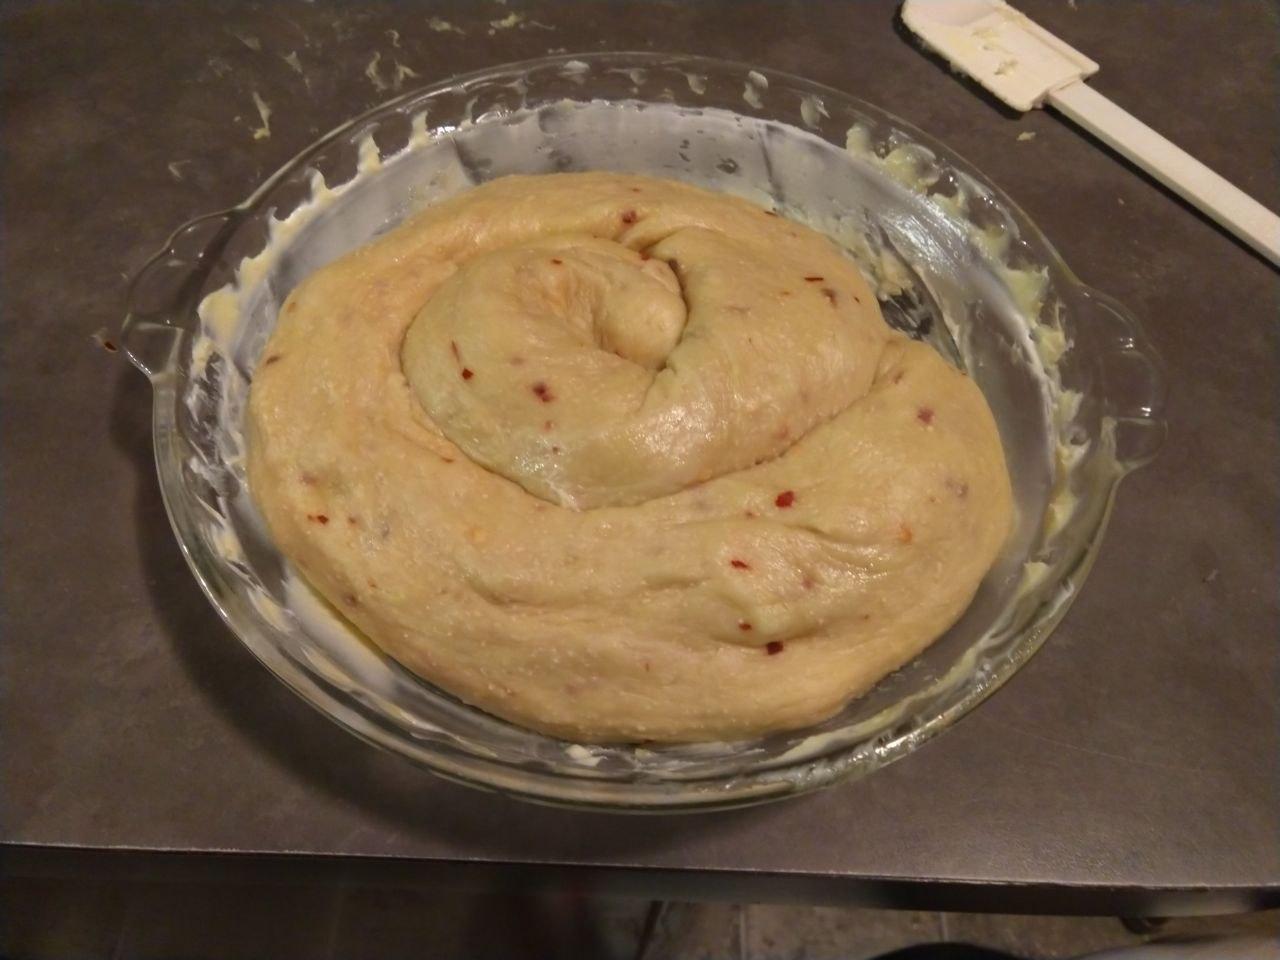 Dough after adding cheese and shaping, ready to rise.